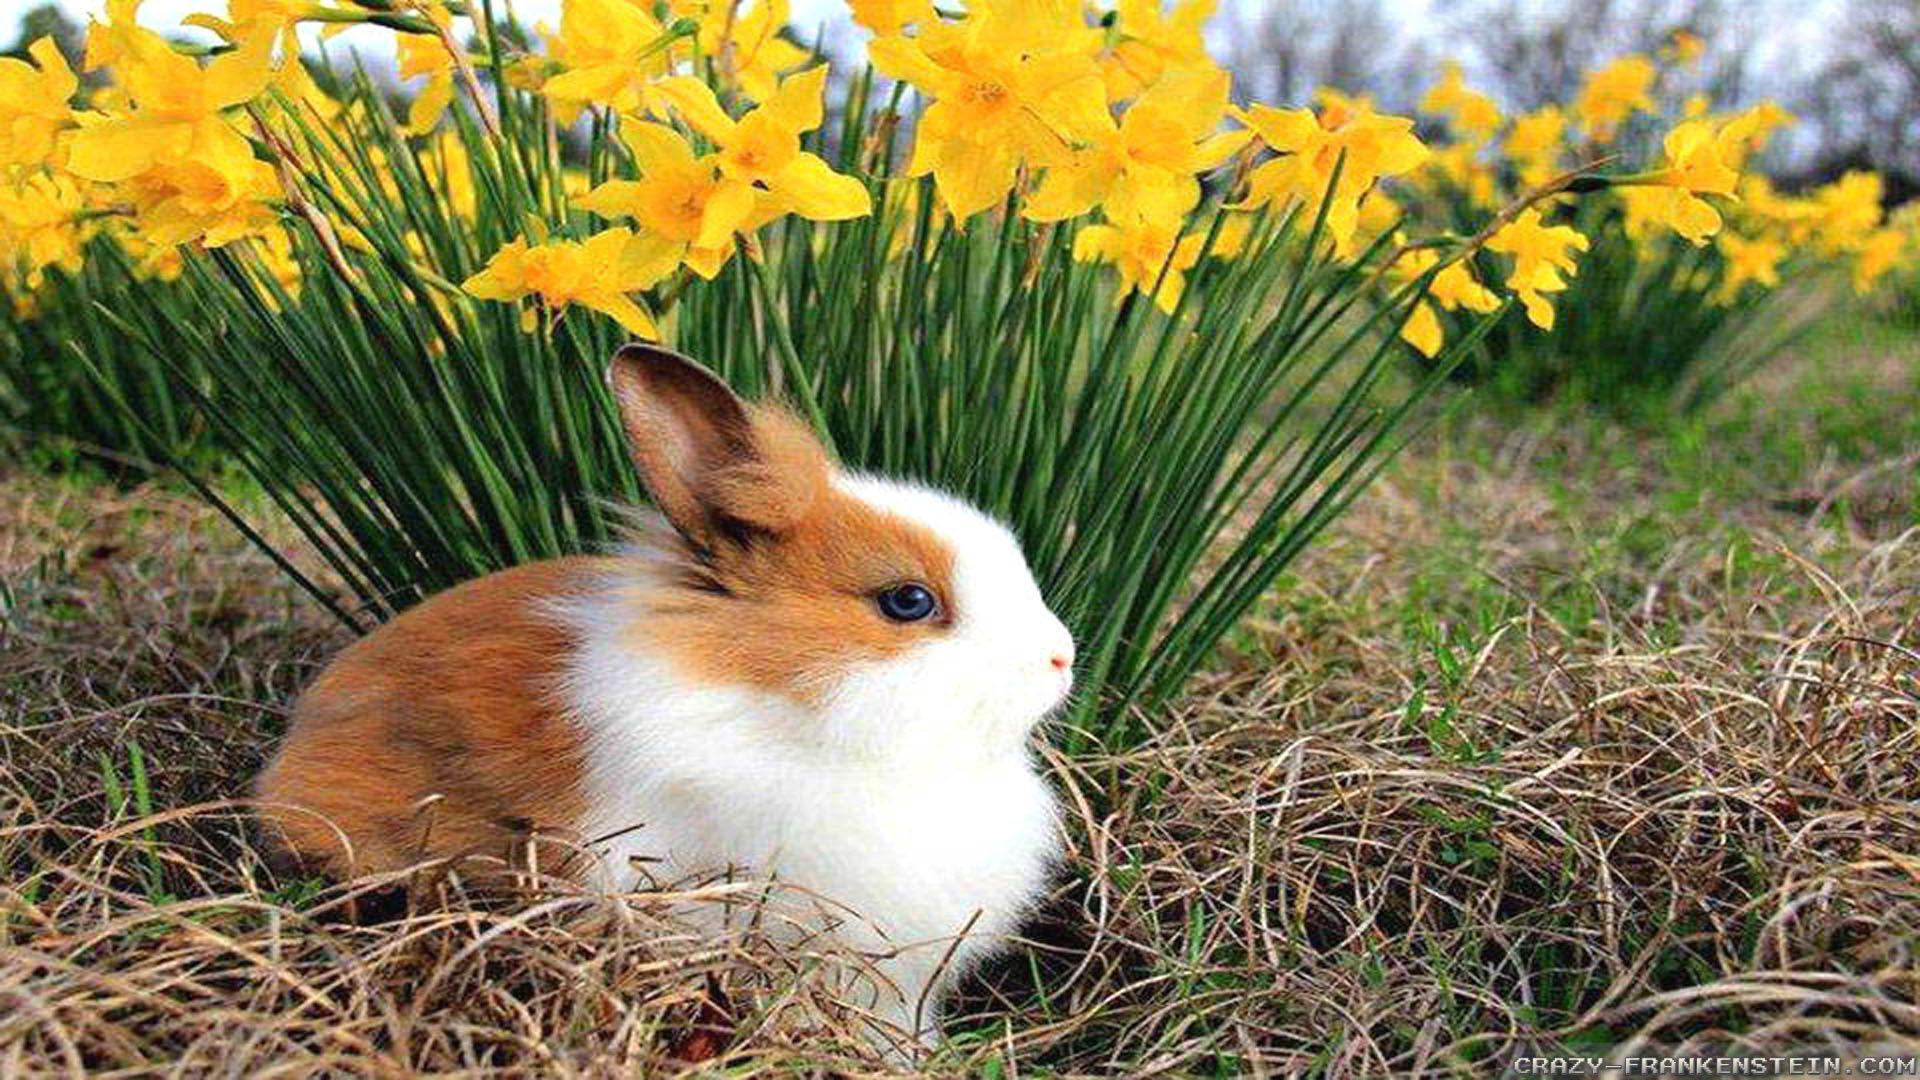 spring animal picture Image Search Results. spring